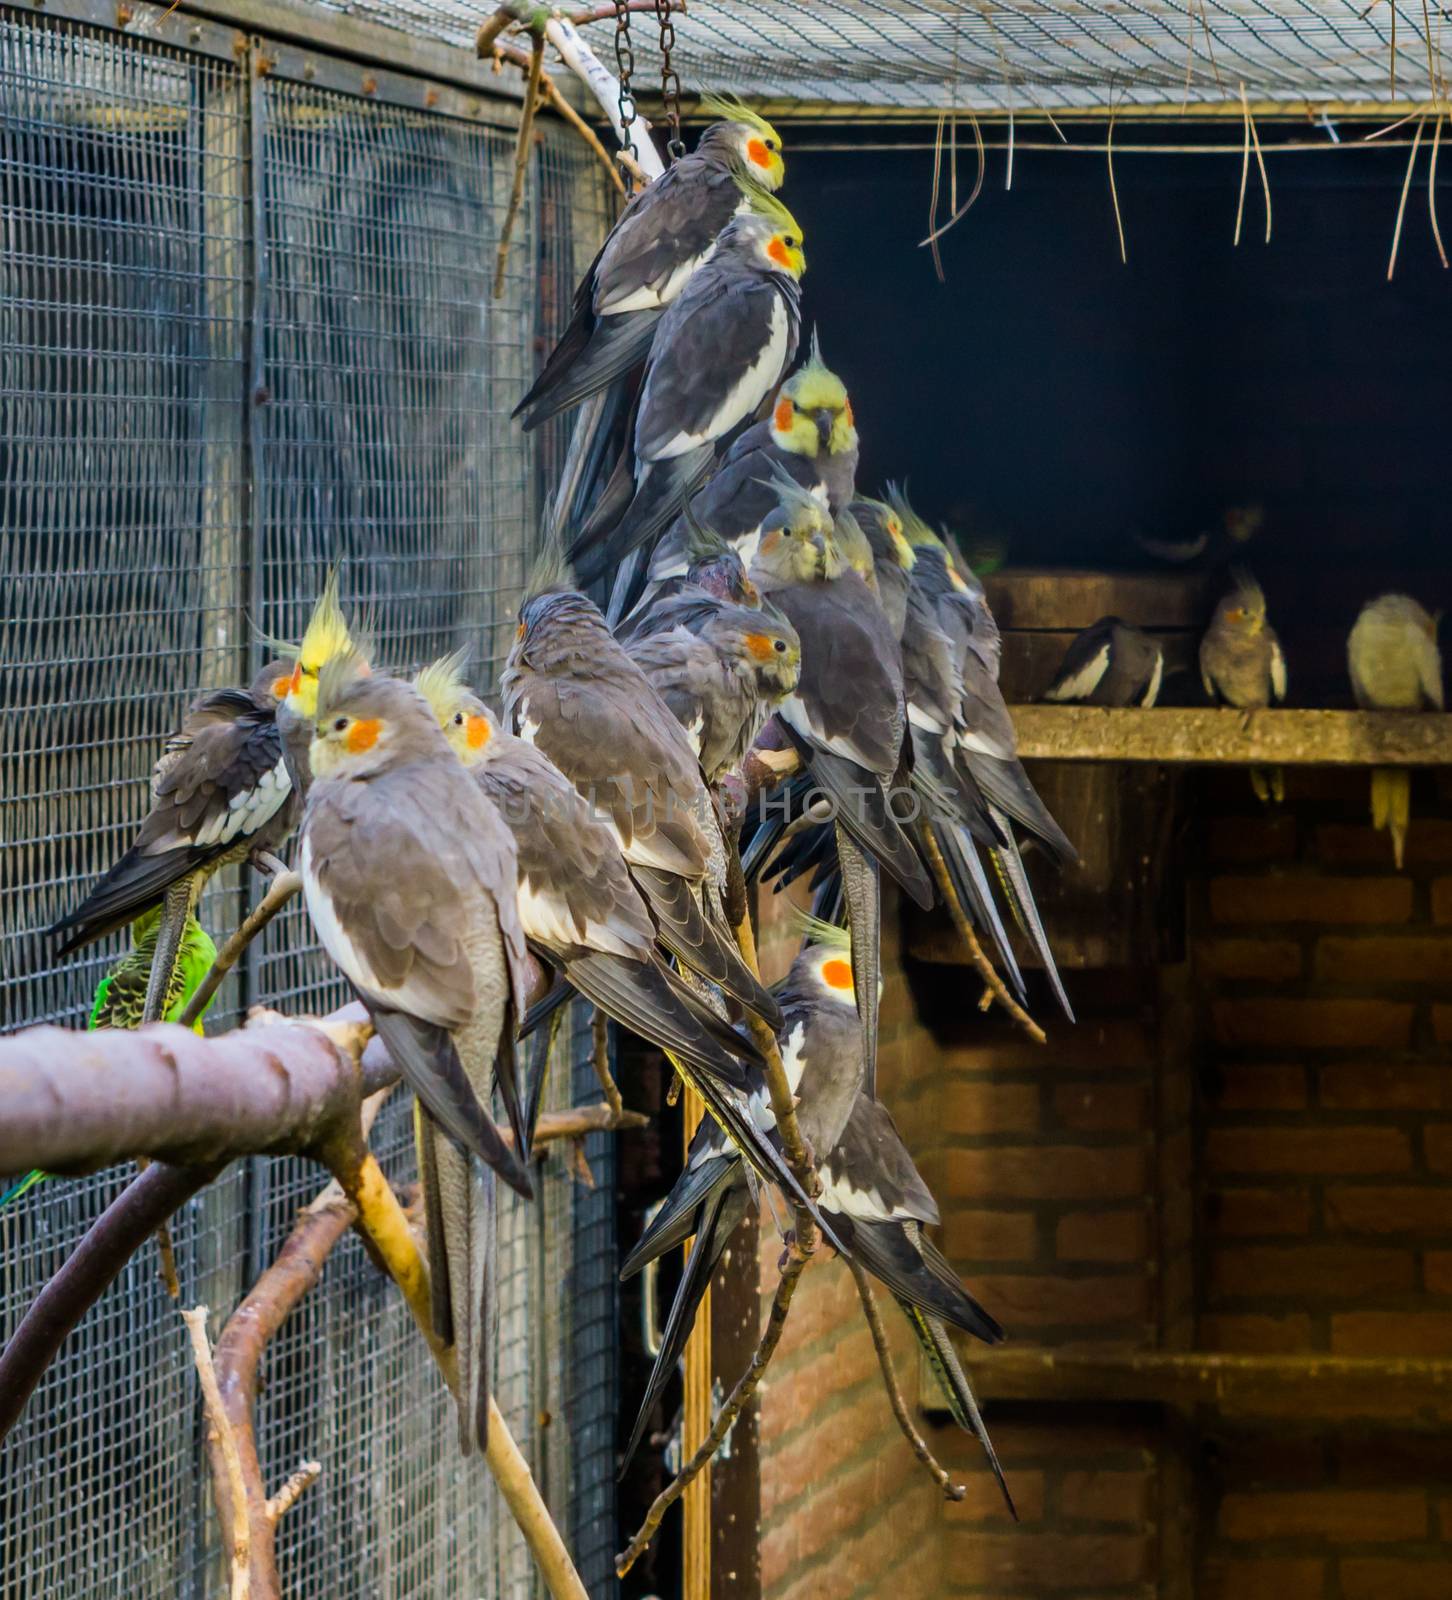 Aviculture, a aviary full of cockatiels, tropical crested birds from Australia, Popular pets by charlottebleijenberg